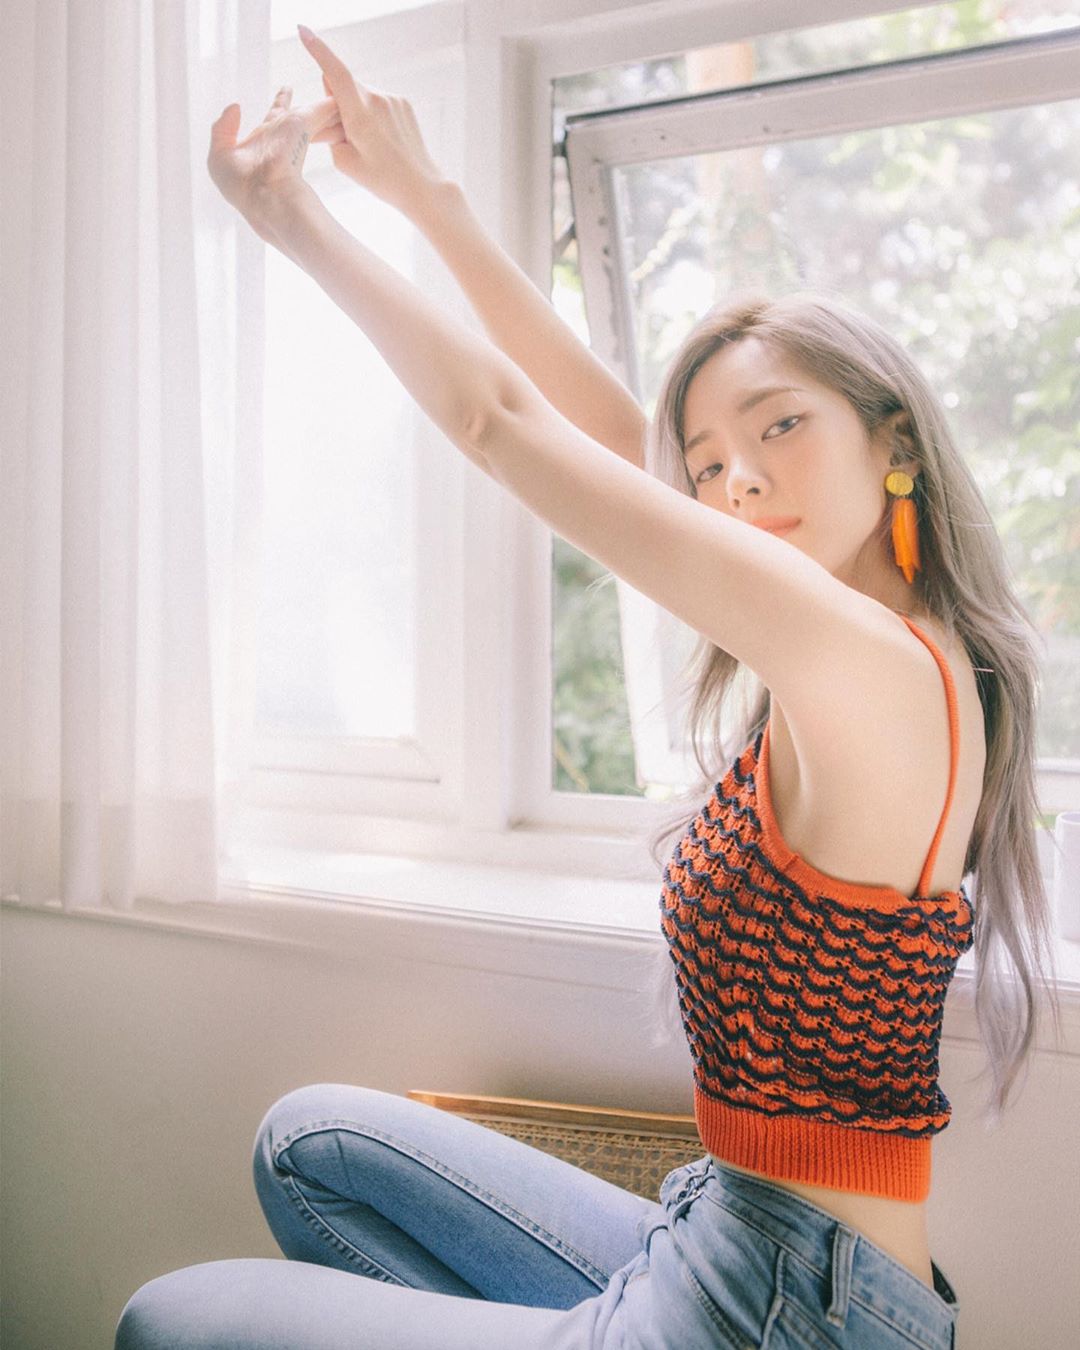 Singer Heize has been telling the recent prettier days.On the 5th, Heize posted a picture on his instagram with a picture, The expression is still, the sound is loud.Heize is sitting by the window, wearing jeans on an orange knit nash and stretching with both hands, looking at the camera.Heize participated in the TVN Saturday drama Hotel Deluna OST on the 28th of last month and released Part5 Can I see my heart.Photo = Heize Instagram